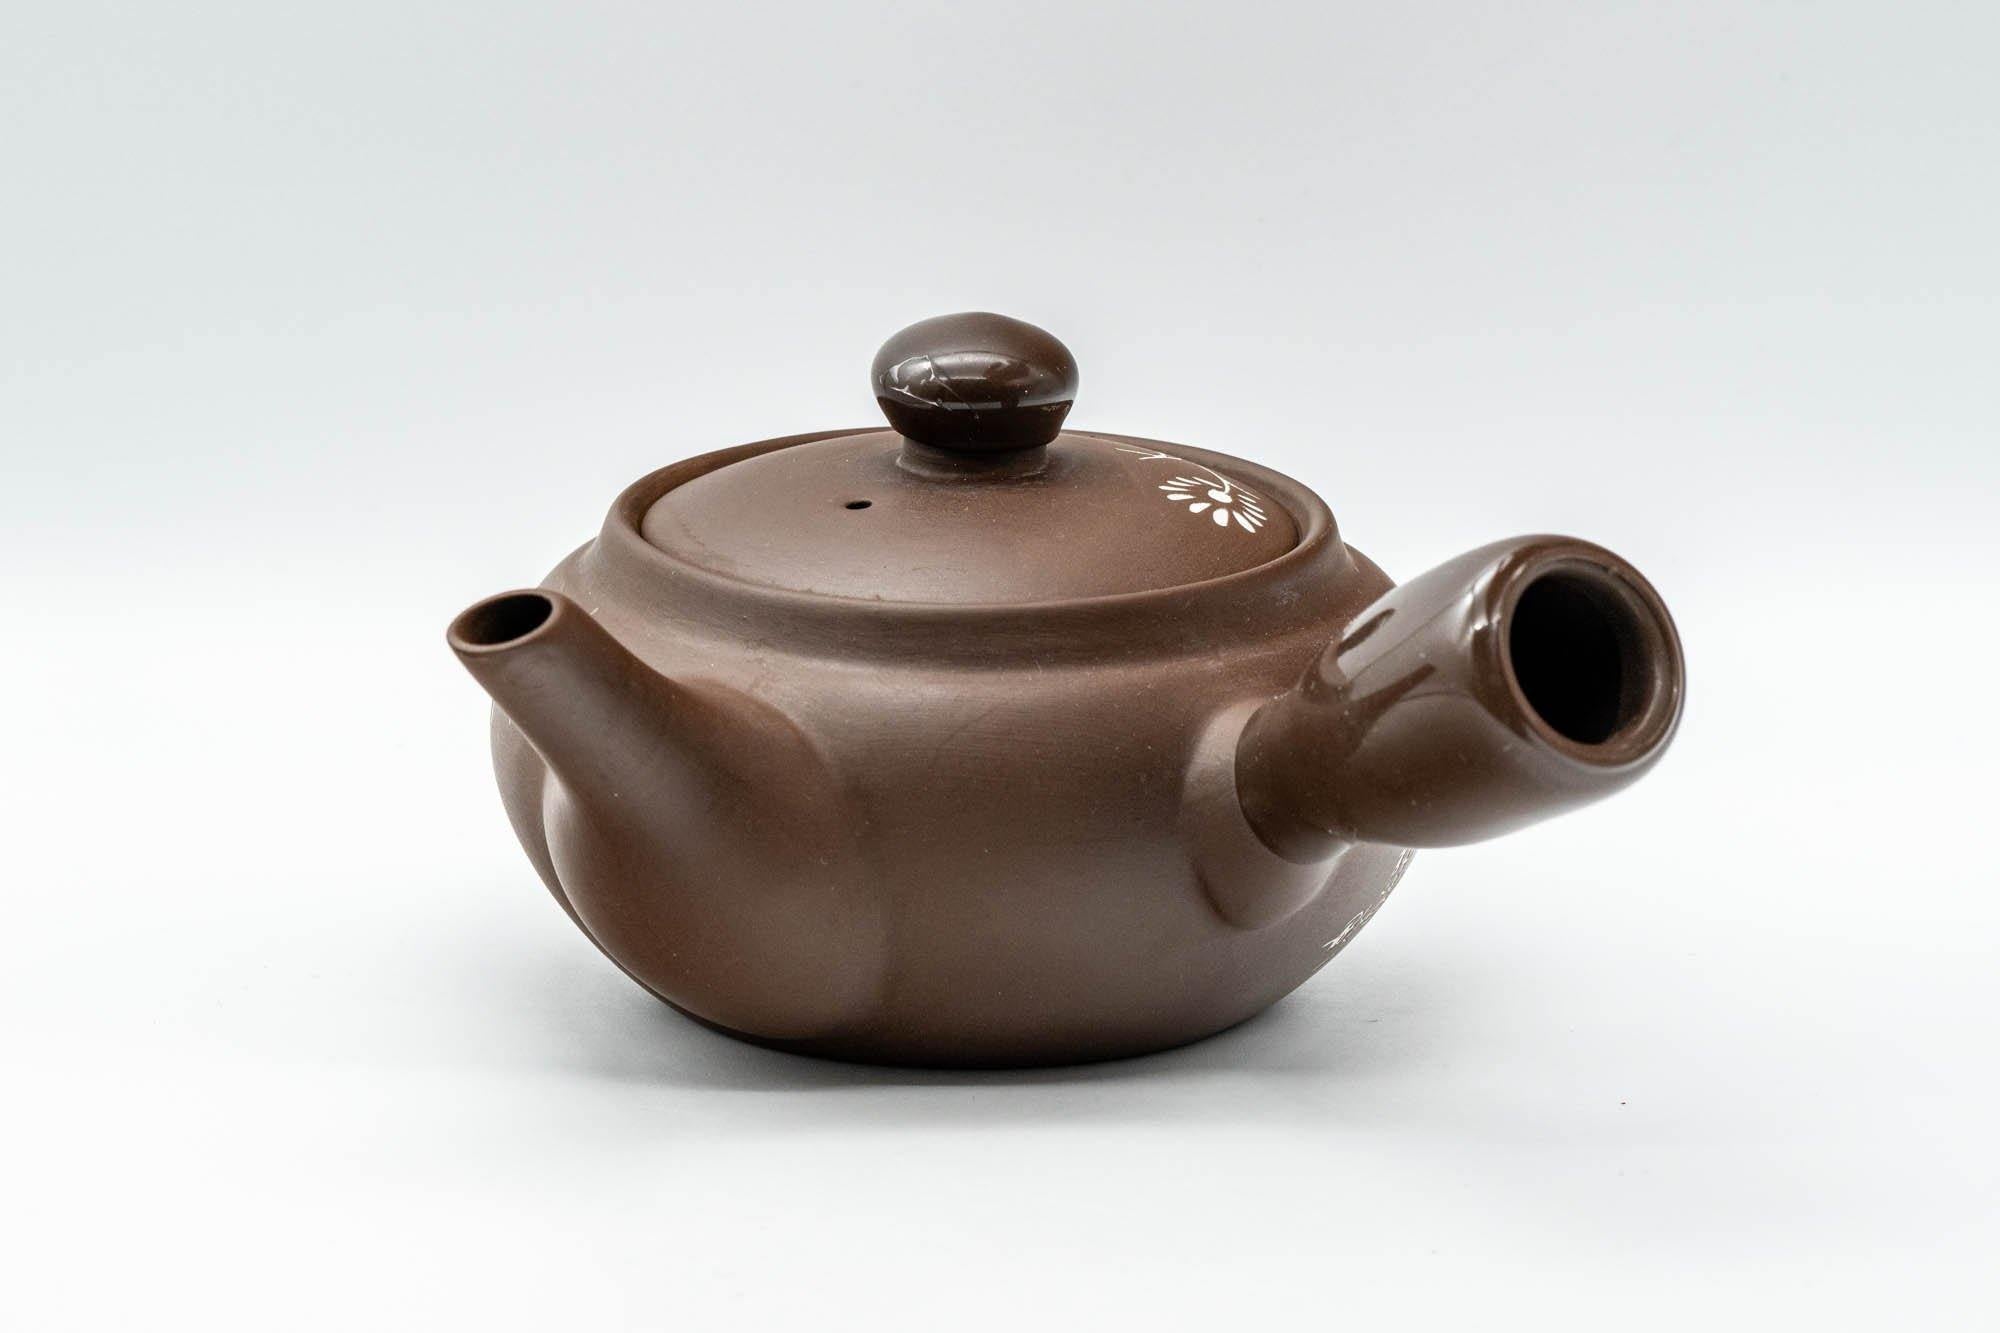 Japanese Kyusu - Floral White and Brown Teapot with Rubber Grip - 250ml - Tezumi